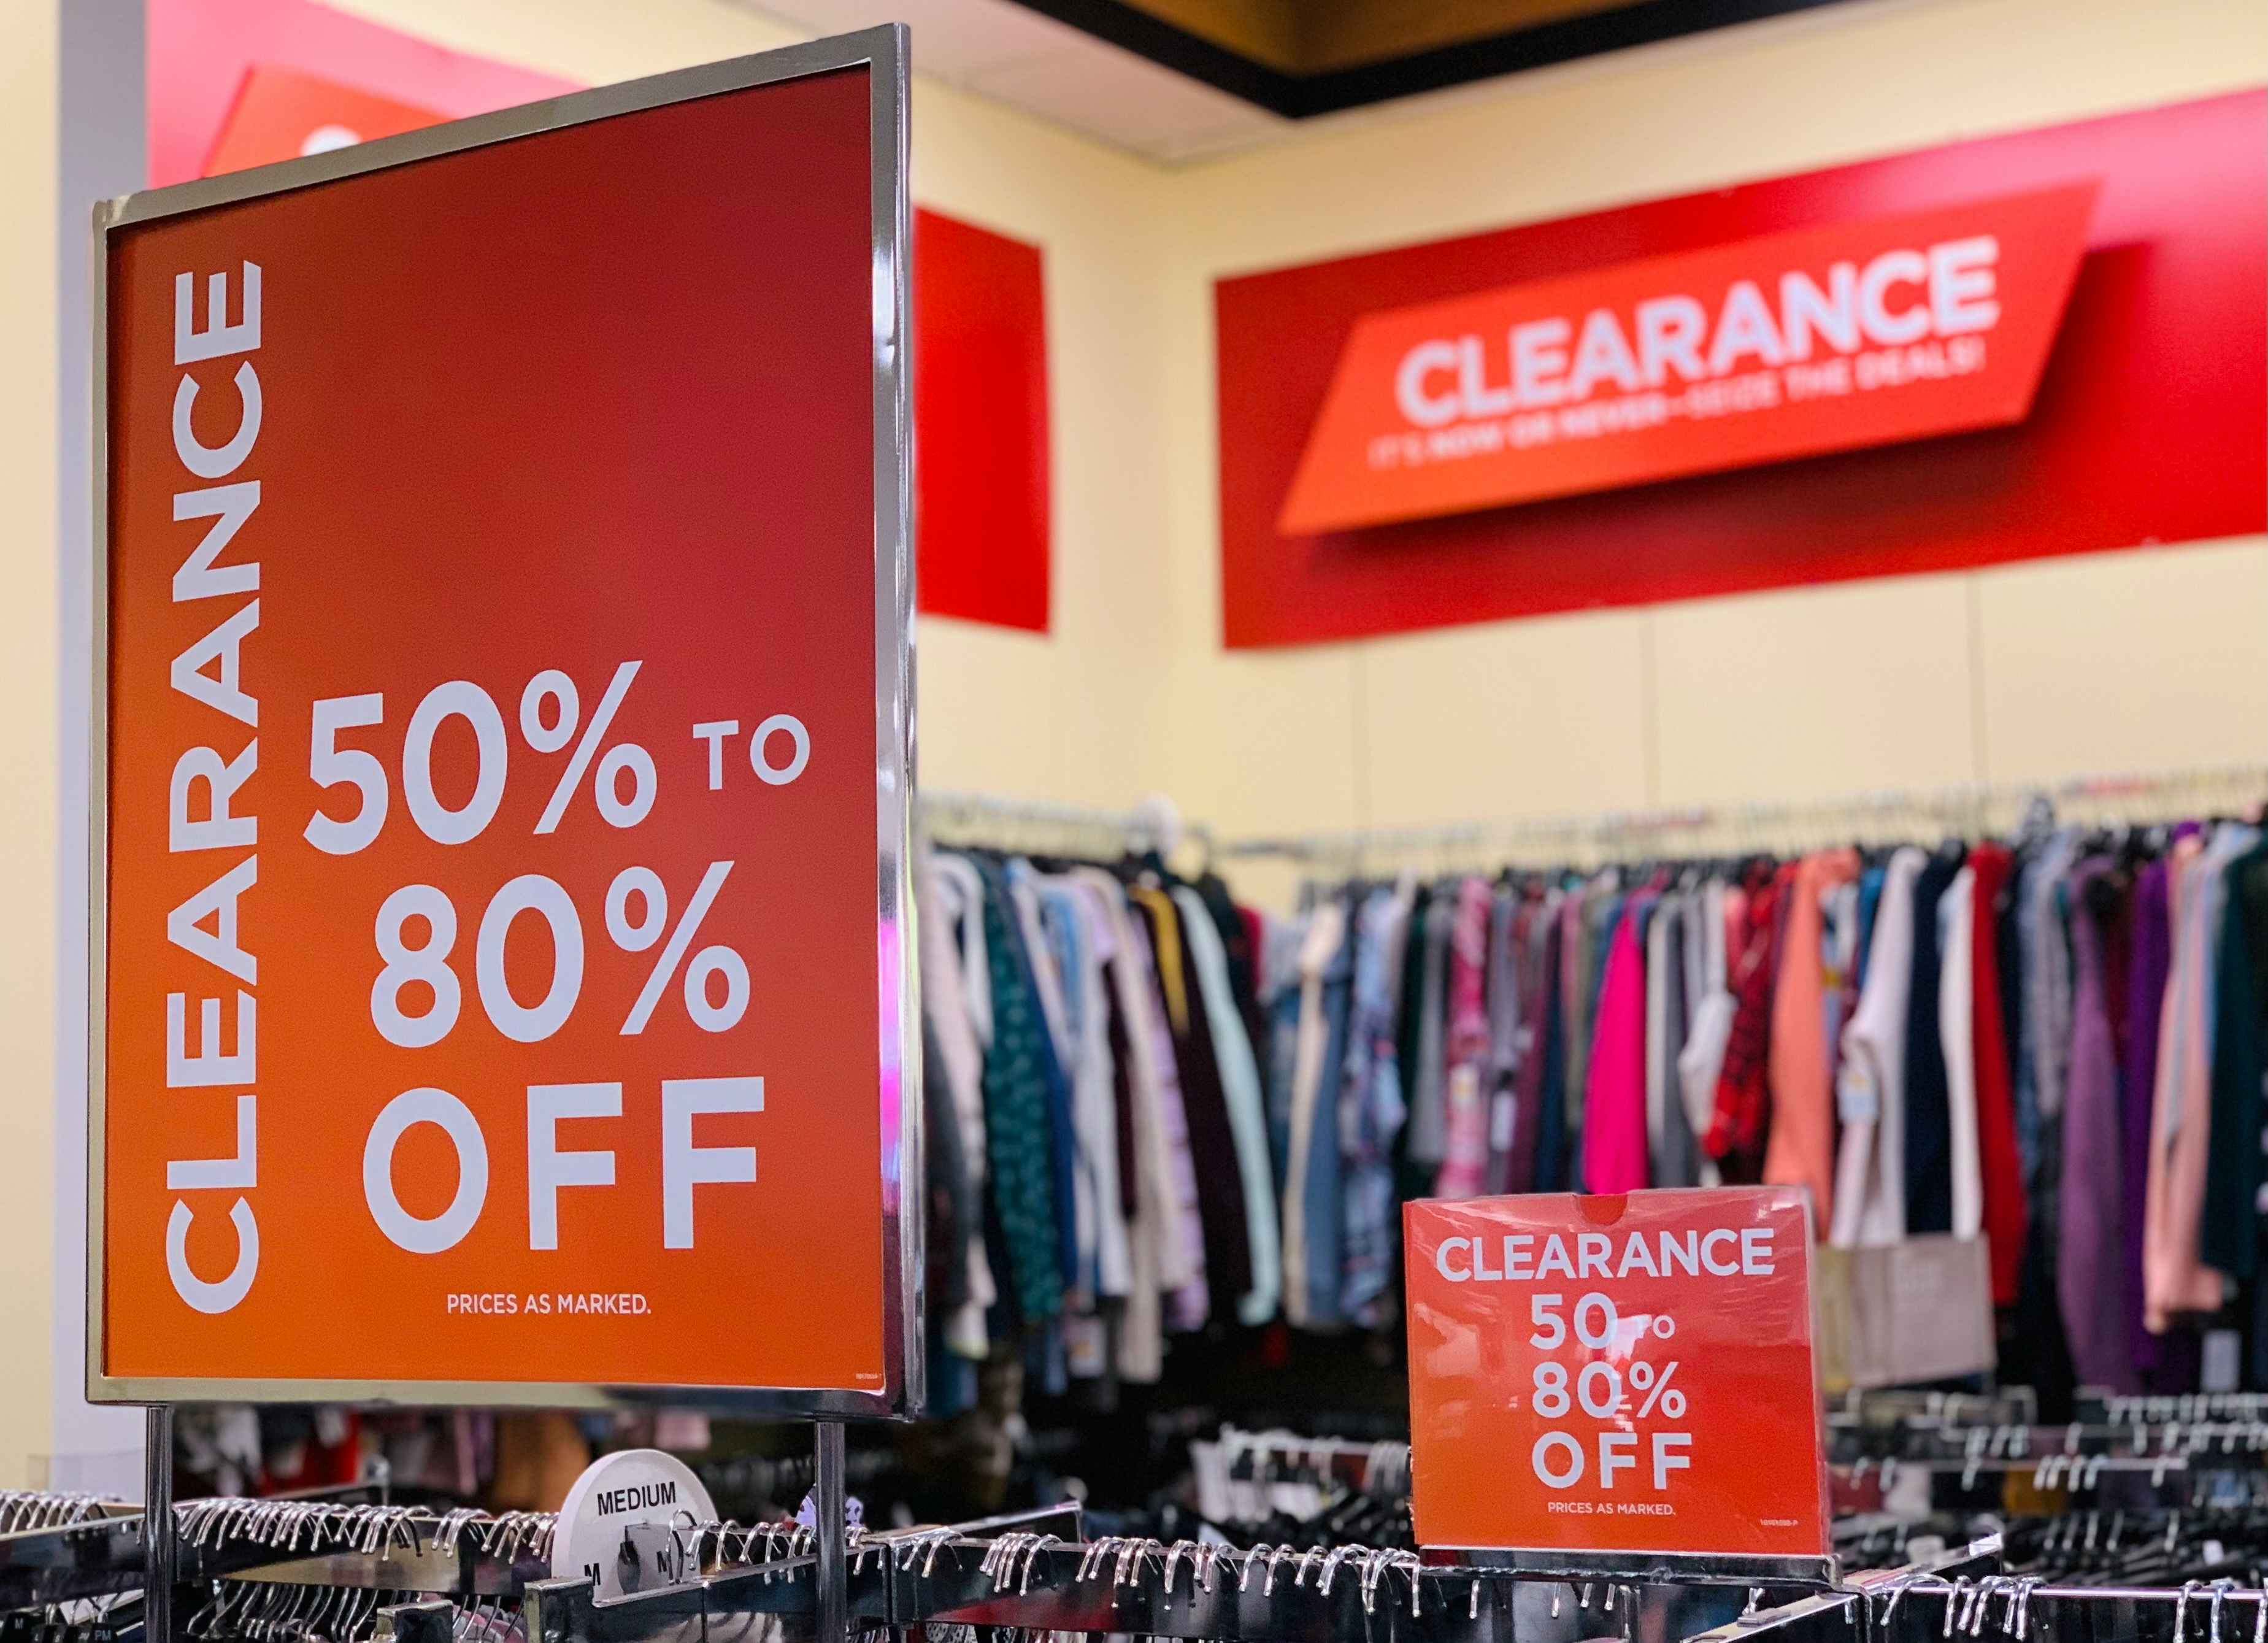 Kohl's Clearance Deals - HUGE Savings Up to 76% Off!